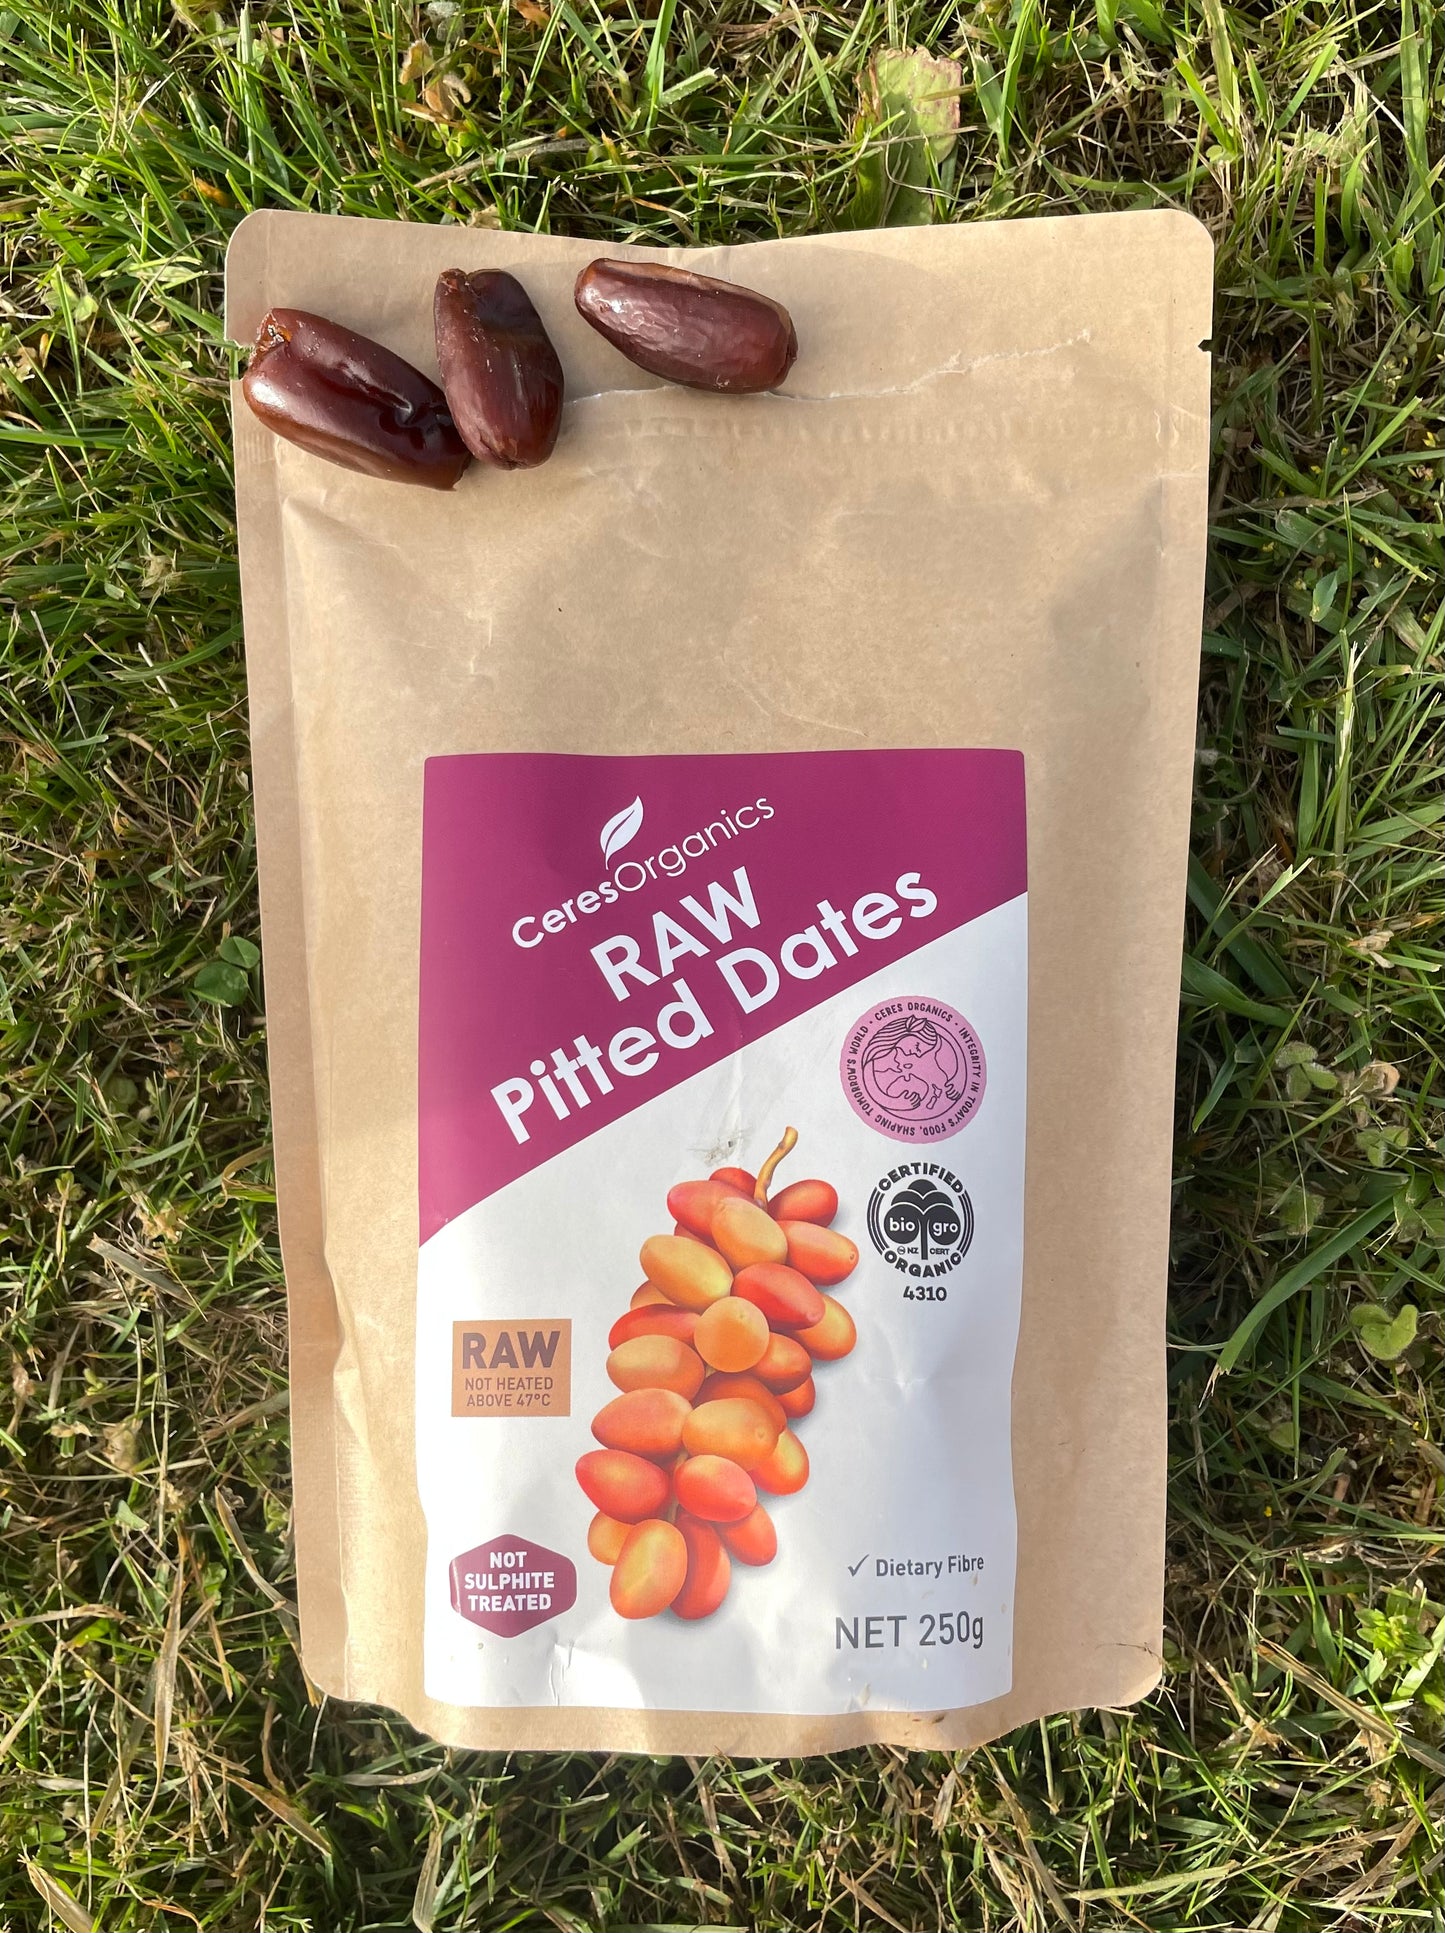 Ceres organic raw pitted dates